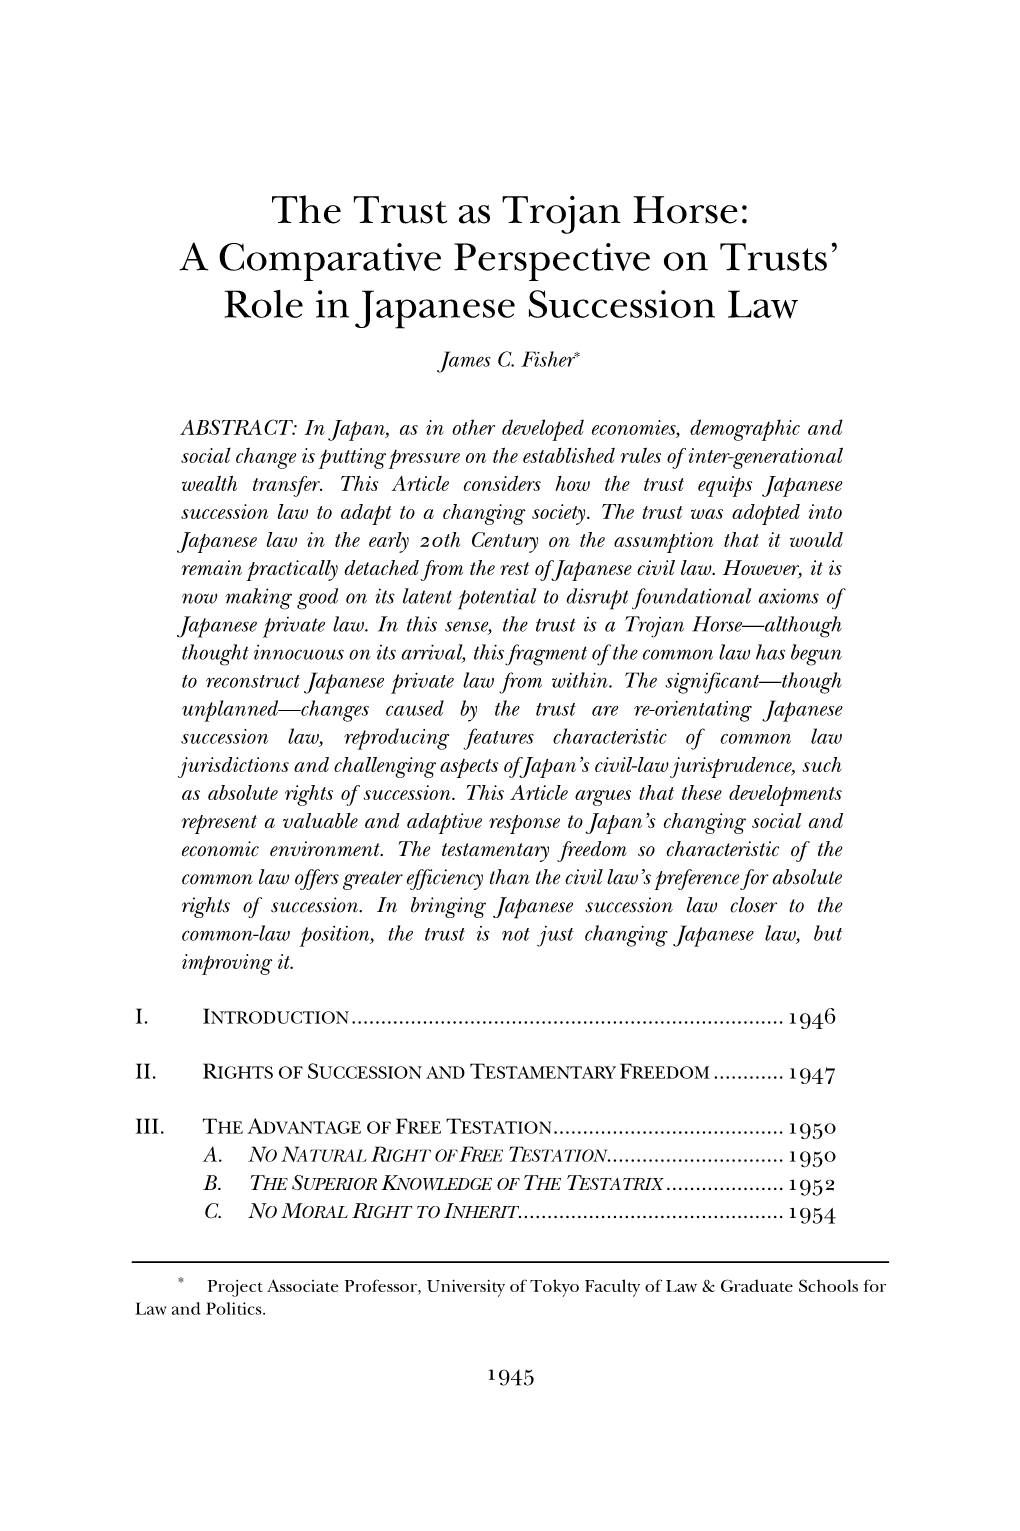 The Trust As Trojan Horse: a Comparative Perspective on Trusts’ Role in Japanese Succession Law